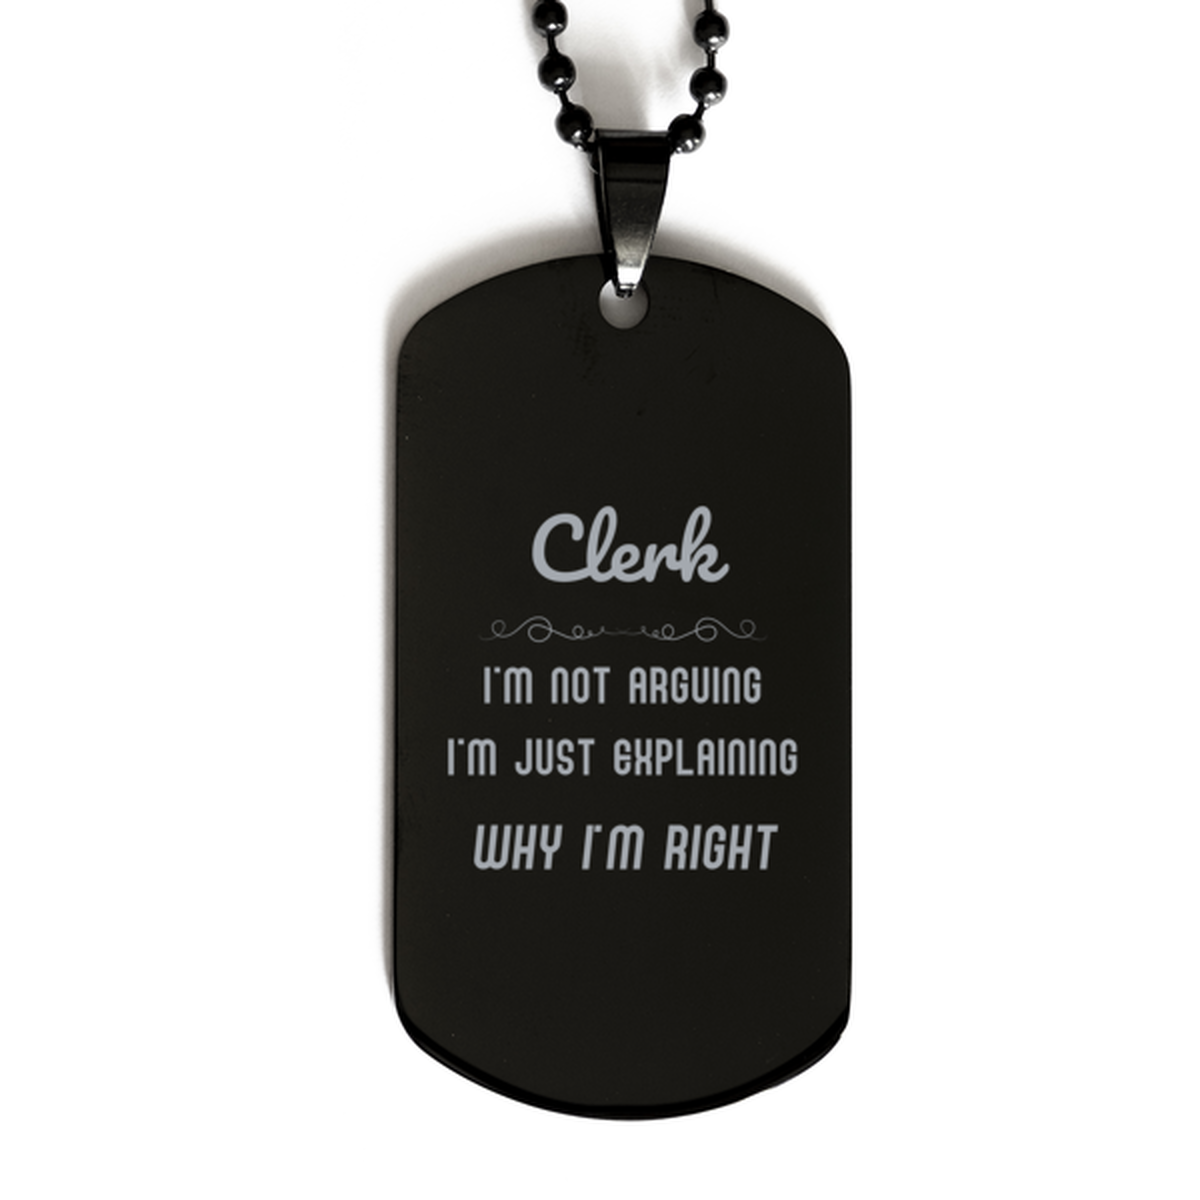 Clerk I'm not Arguing. I'm Just Explaining Why I'm RIGHT Black Dog Tag, Funny Saying Quote Clerk Gifts For Clerk Graduation Birthday Christmas Gifts for Men Women Coworker